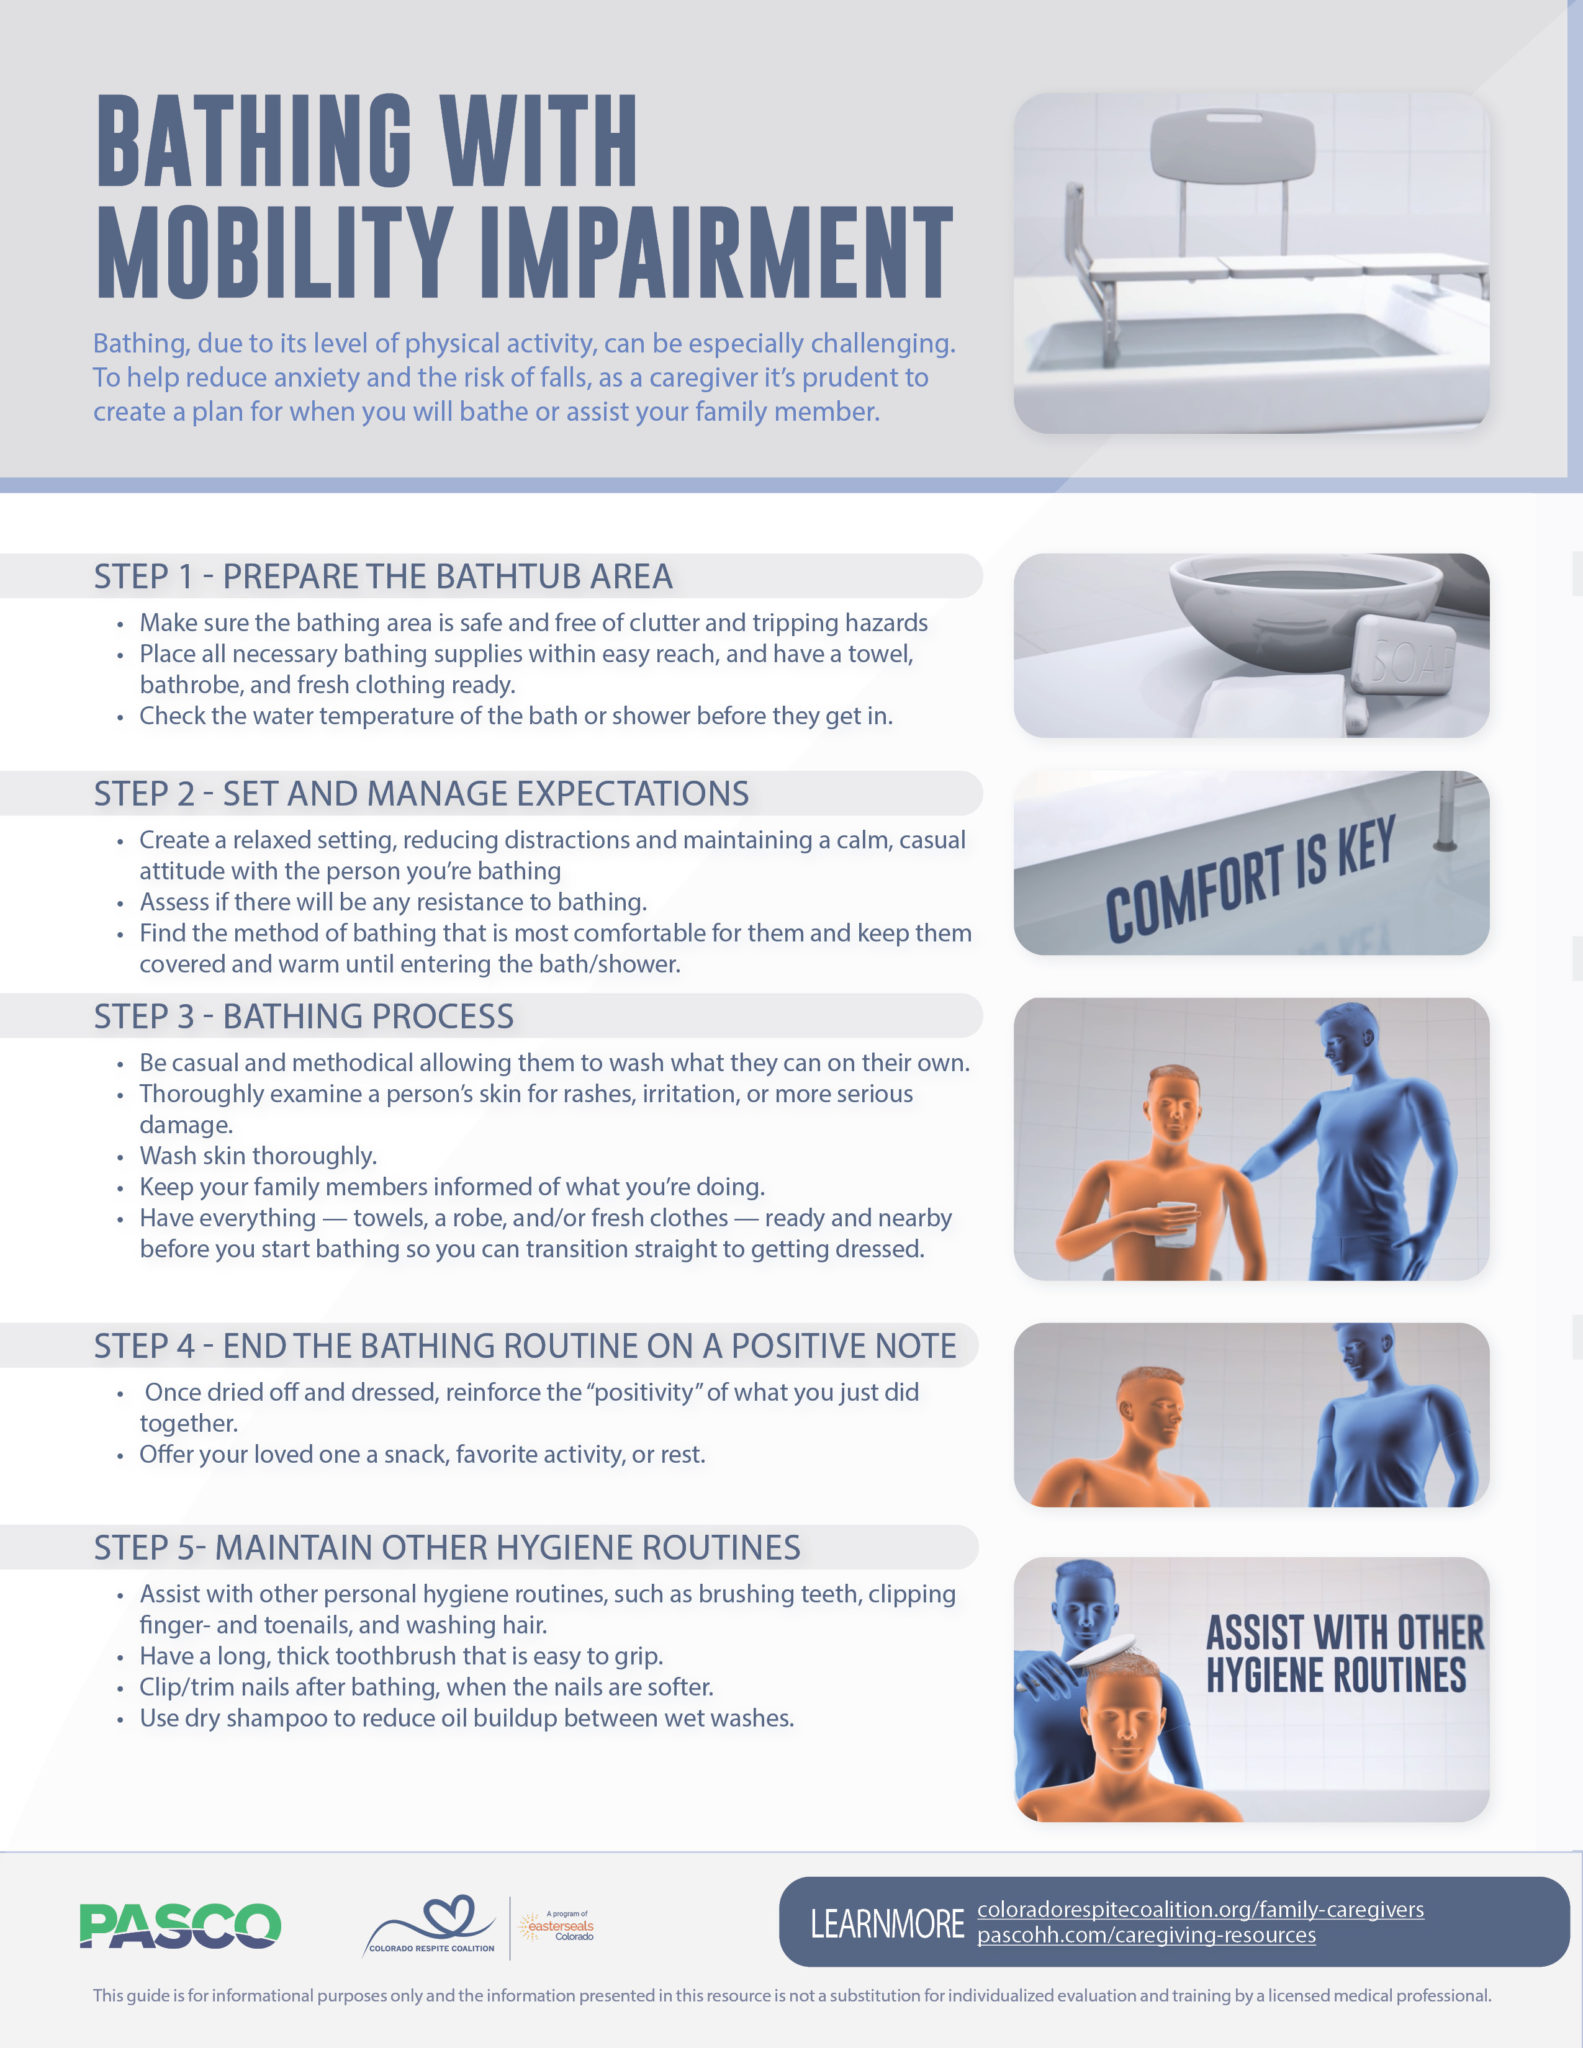 Bathing with Mobility Impairment